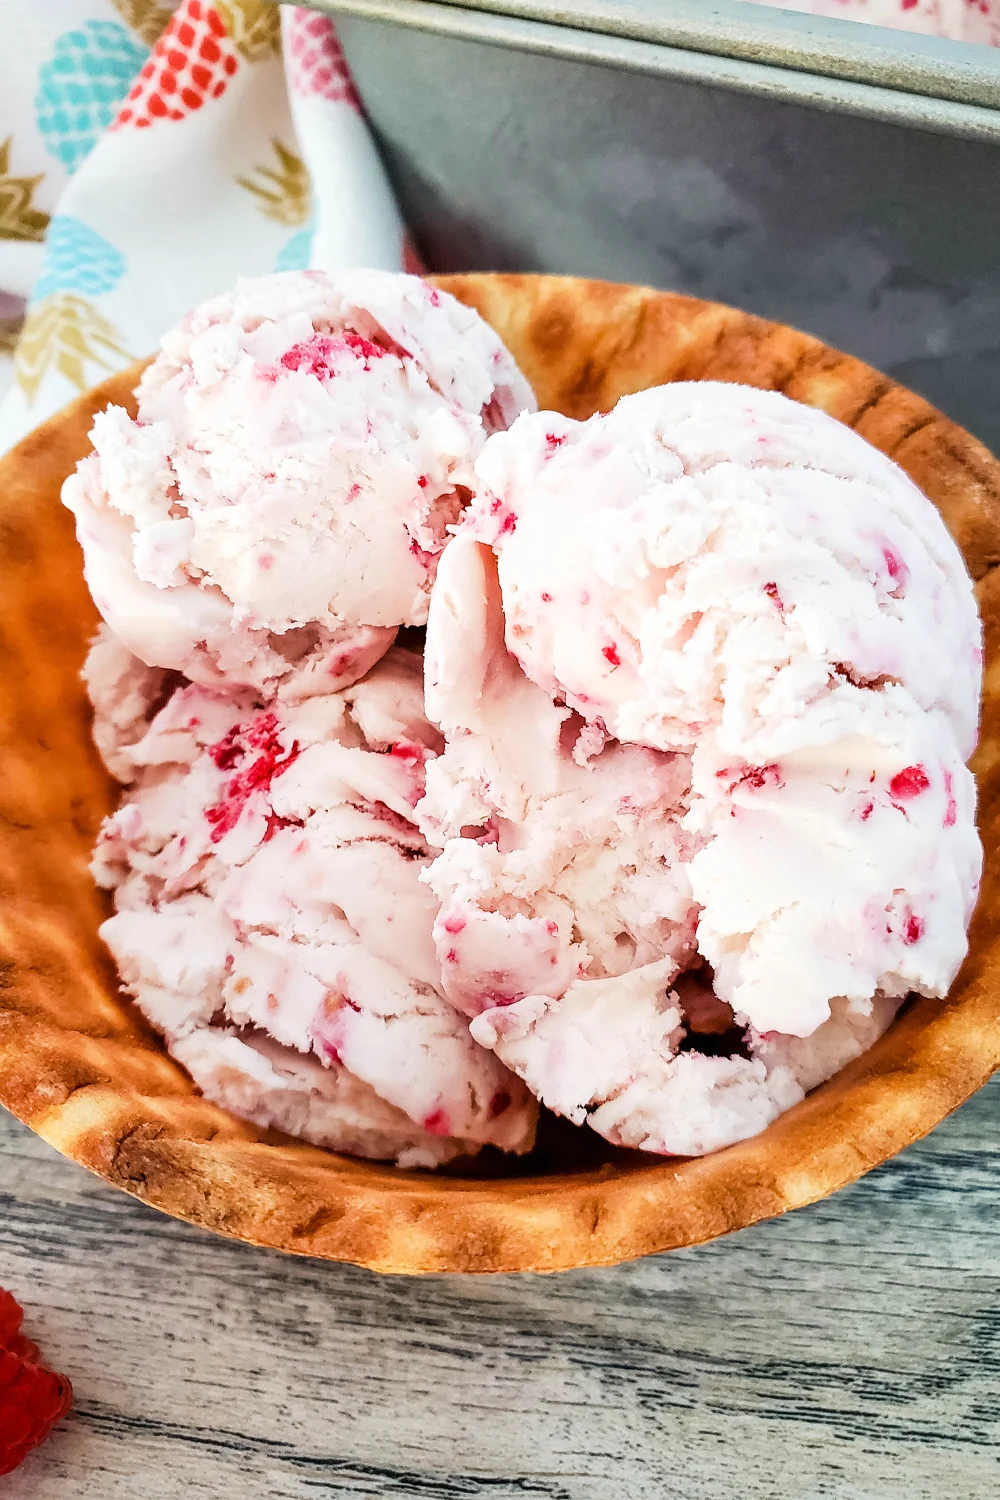 A close up of the completed raspberry ice cream.